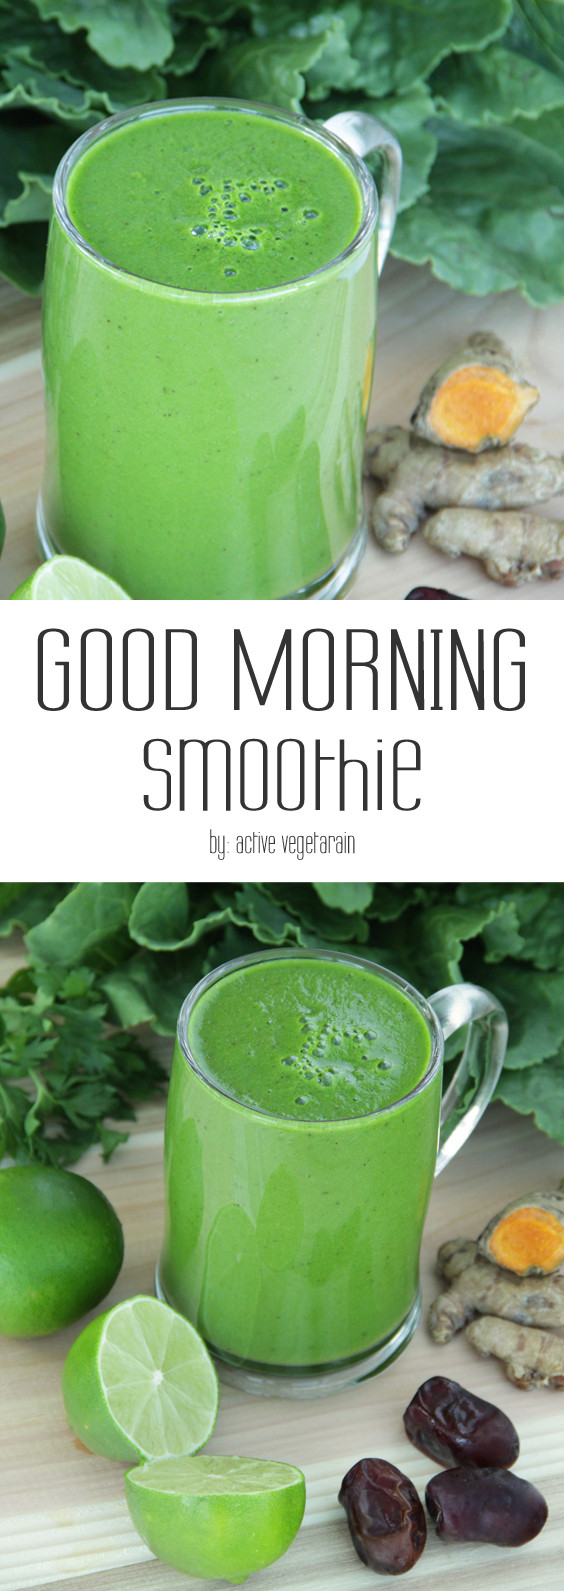 Best Morning Smoothies
 Good Morning Smoothie